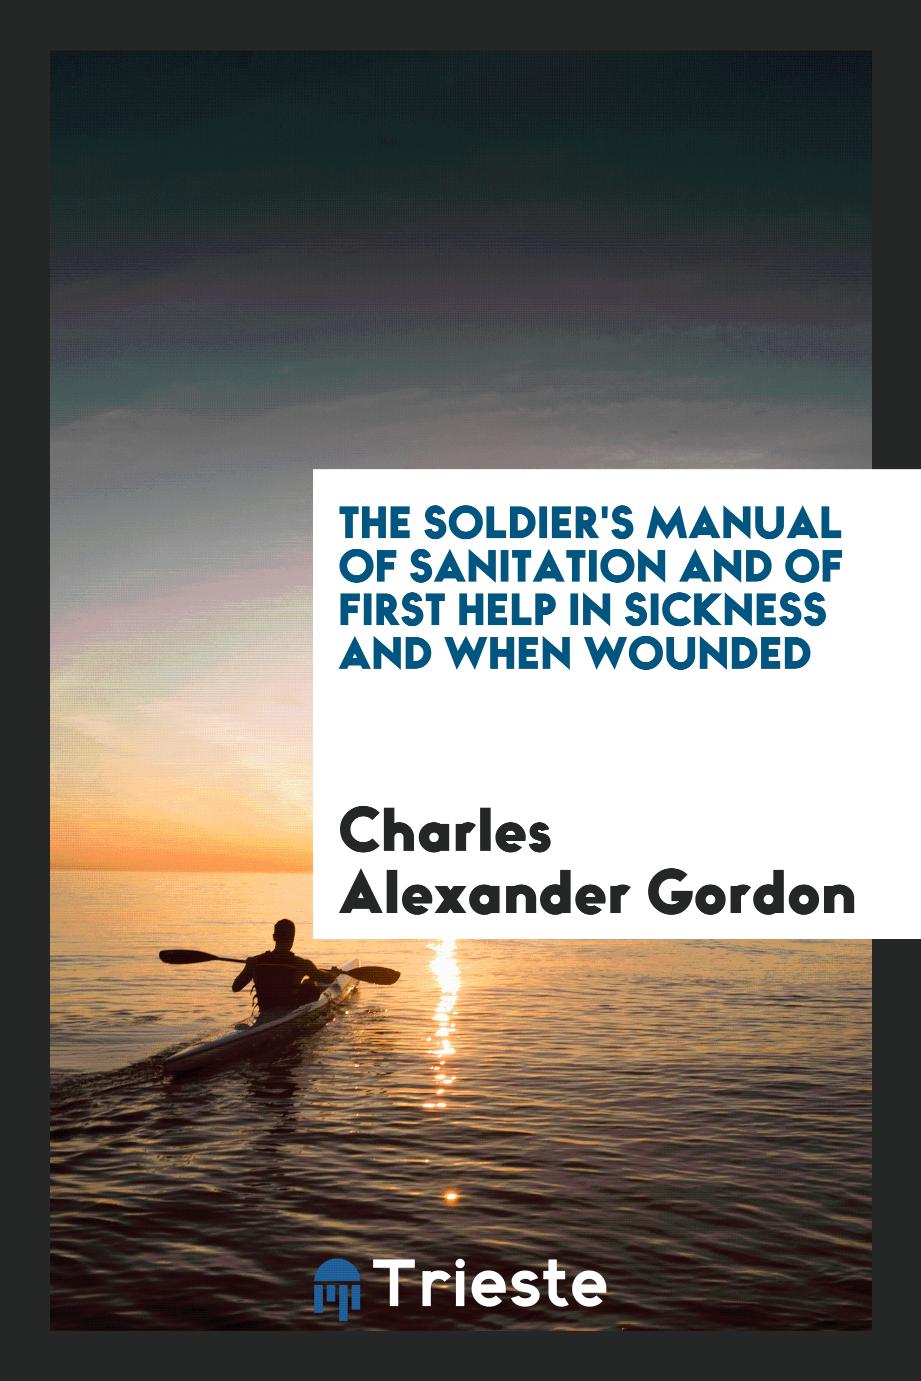 The Soldier's Manual of Sanitation and of First Help in Sickness and When Wounded